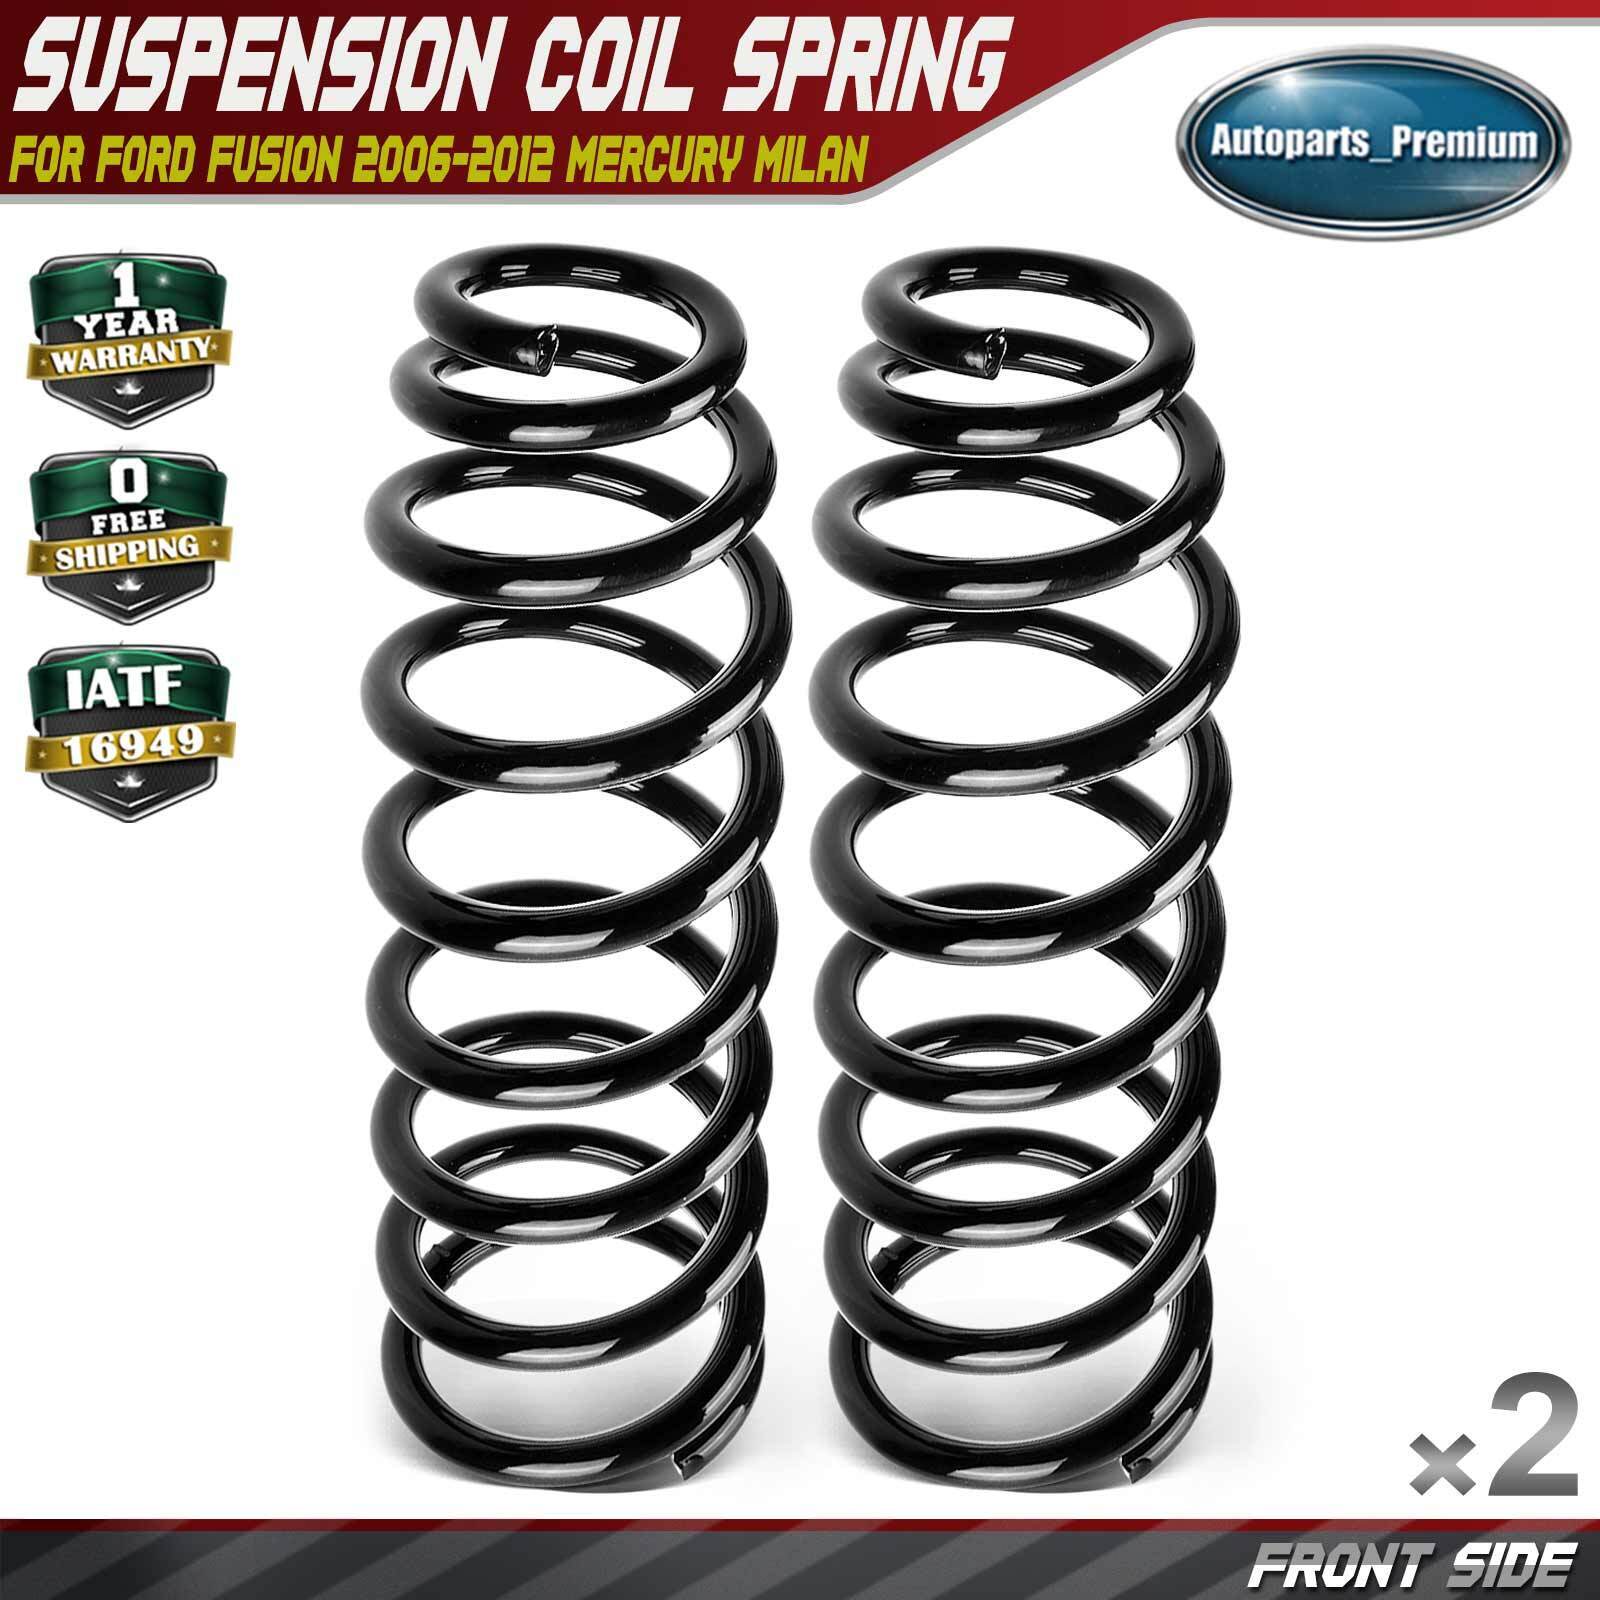 2x Front Coil Spring Set for Ford Fusion 2006-2012 Mercury Milan 06-11 FWD AWD